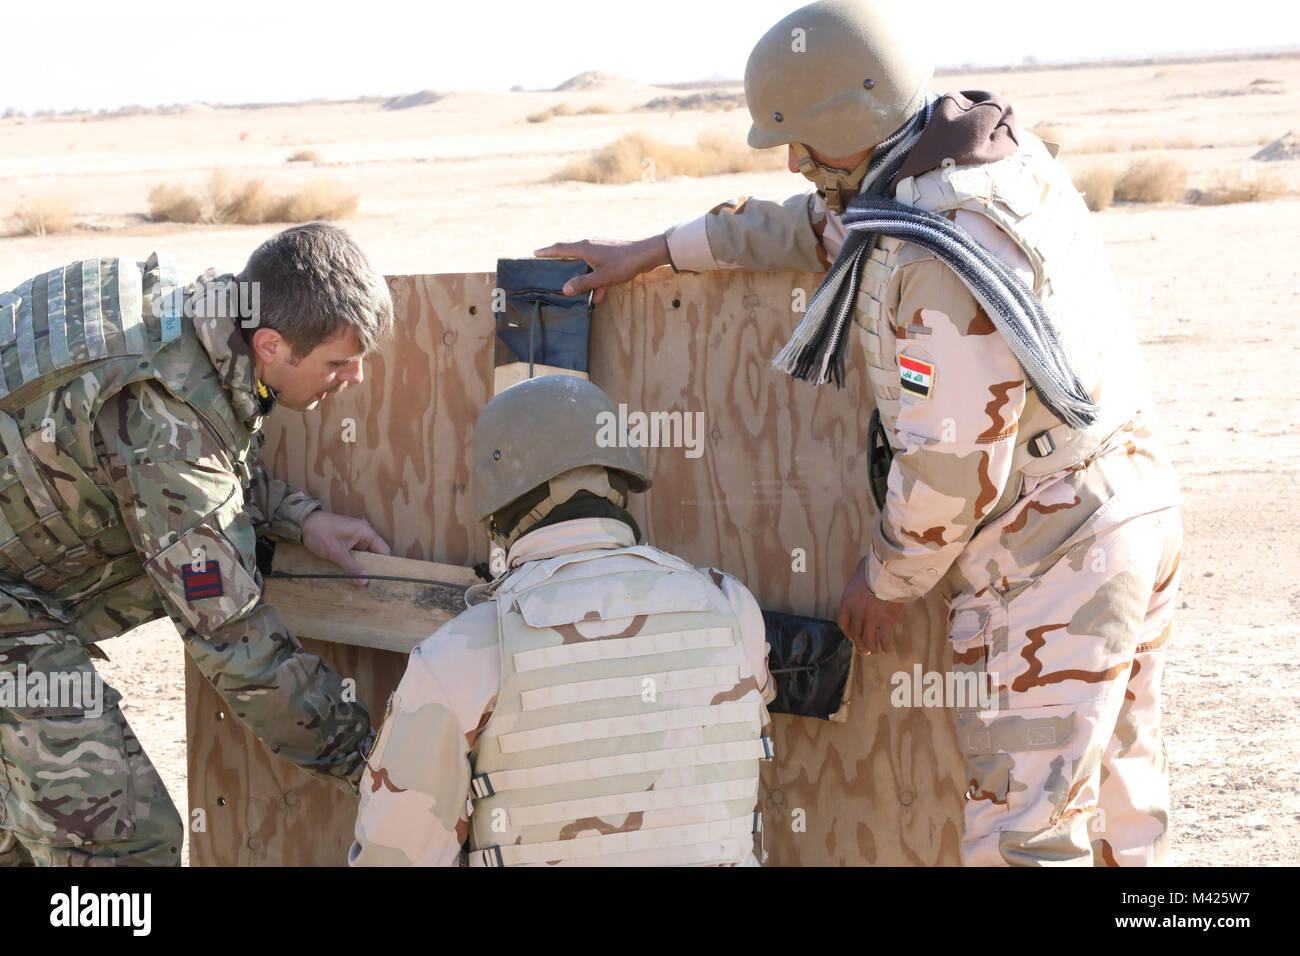 A British army engineer and students assigned to the 38th Brigade, Iraqi army, mount their breaching devices onto plywood as a simulated door at the demolition soldier assault course on the Besmaya Range Complex, Iraq, Jan. 29, 2018.  More than 74 Coalition members have committed themselves to the goal of eliminating the threat posed by ISIS in Iraq and Syria and have contributed in various capacities to the effort. (U.S. Army photo by Master Sgt. Horace Murray) Stock Photo